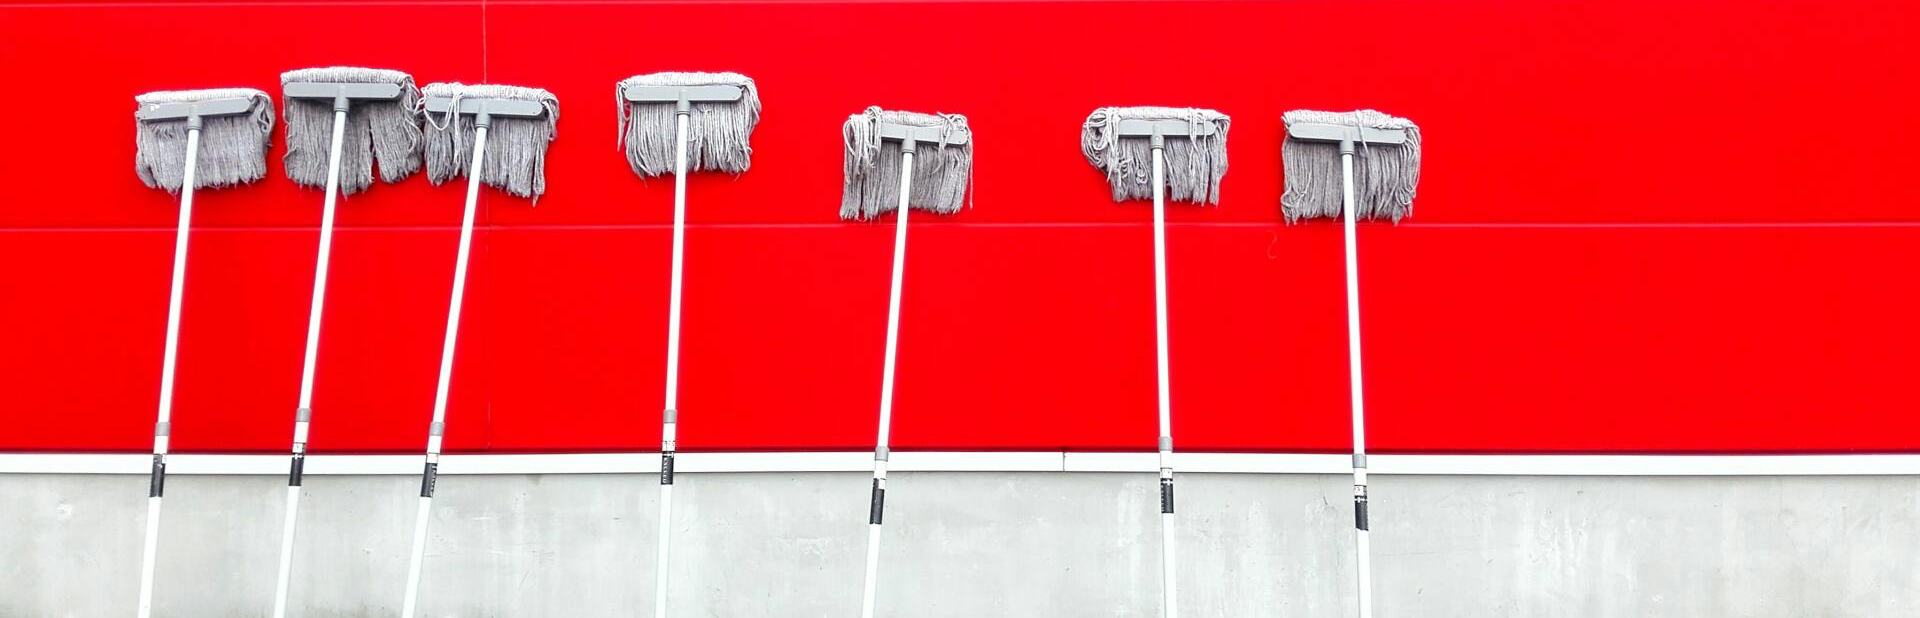 A row of mops against a red wall.